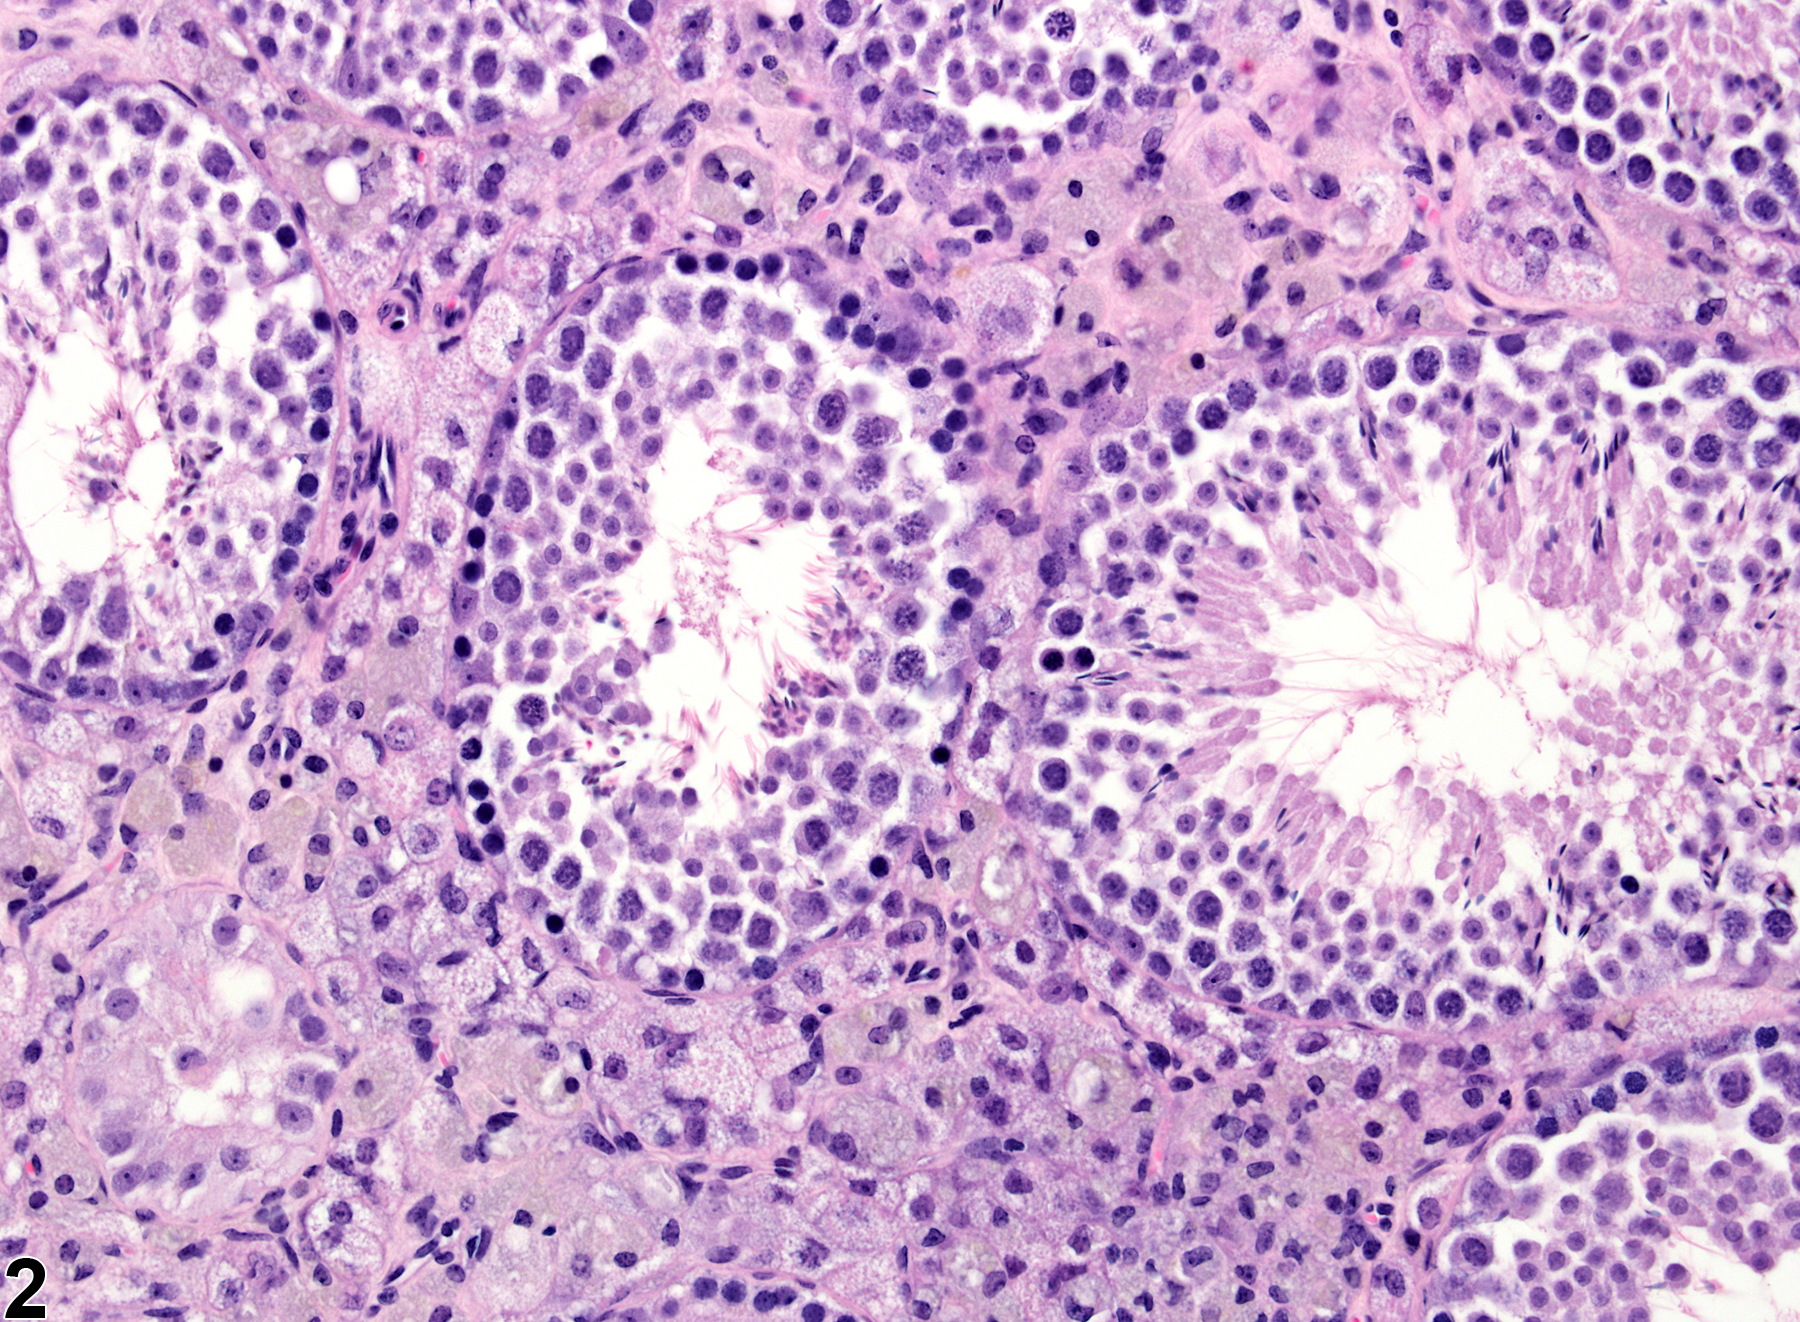 Image of interstitial cell vacuolation in the testis from a male FVB/N mouse in a chronic study